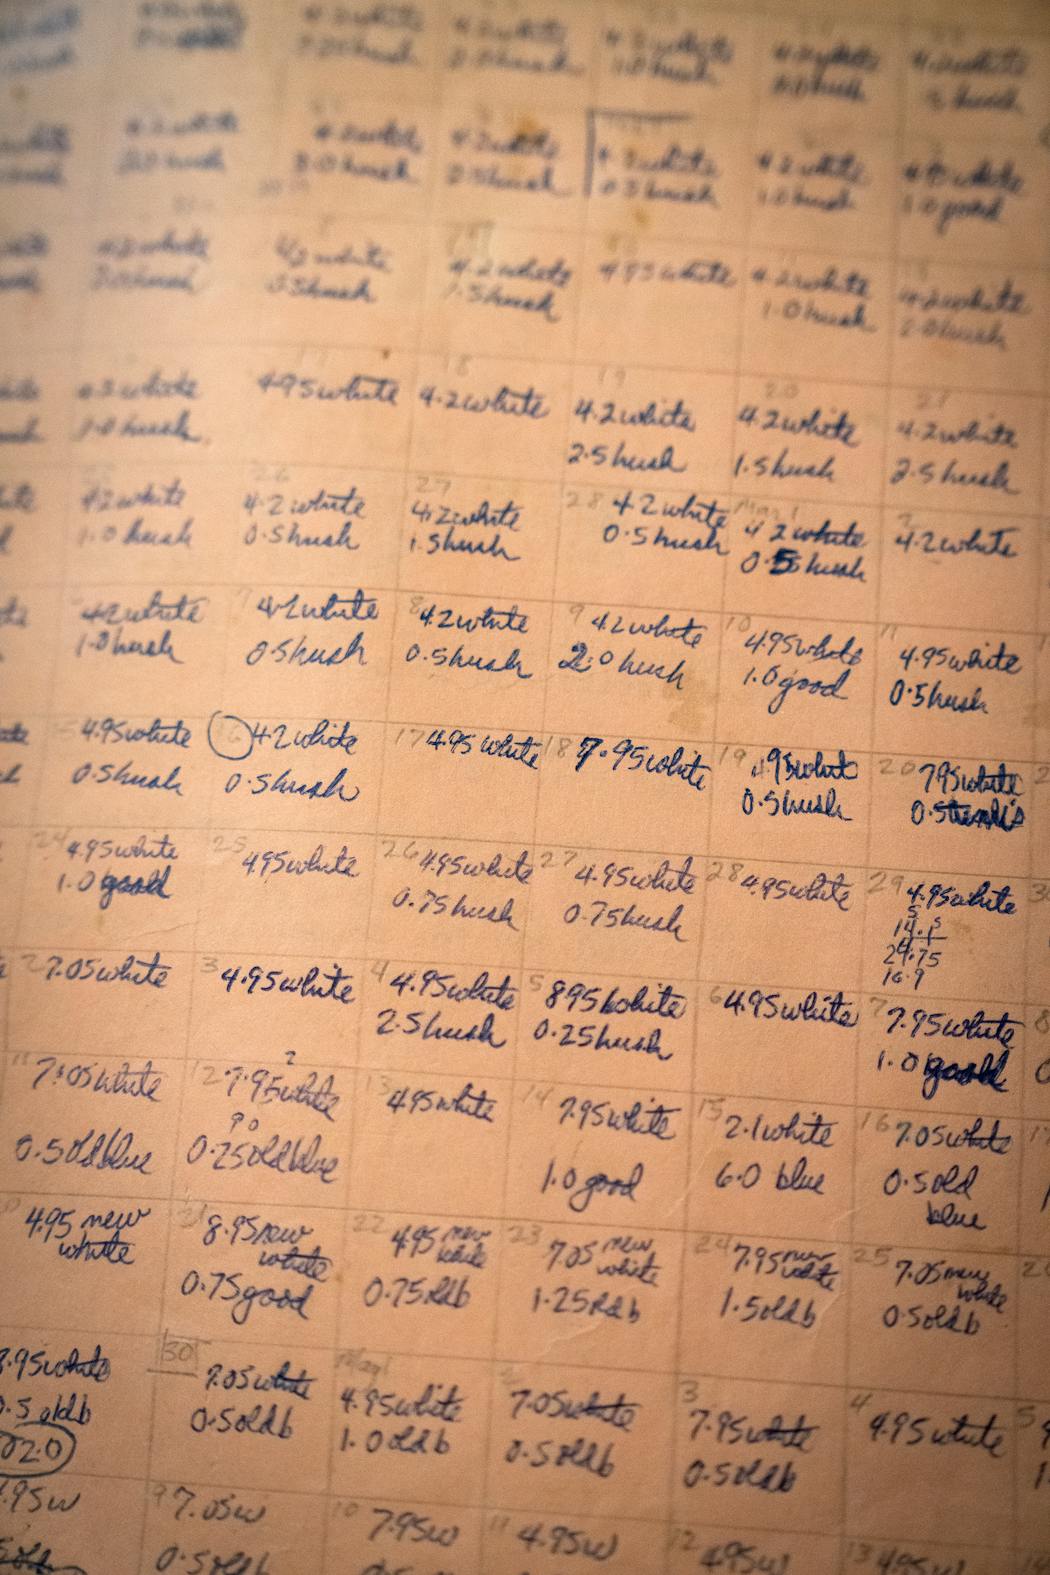 Steve DeBoer’s running log from 1974 shows his mileage and which shoes he wore for each run.